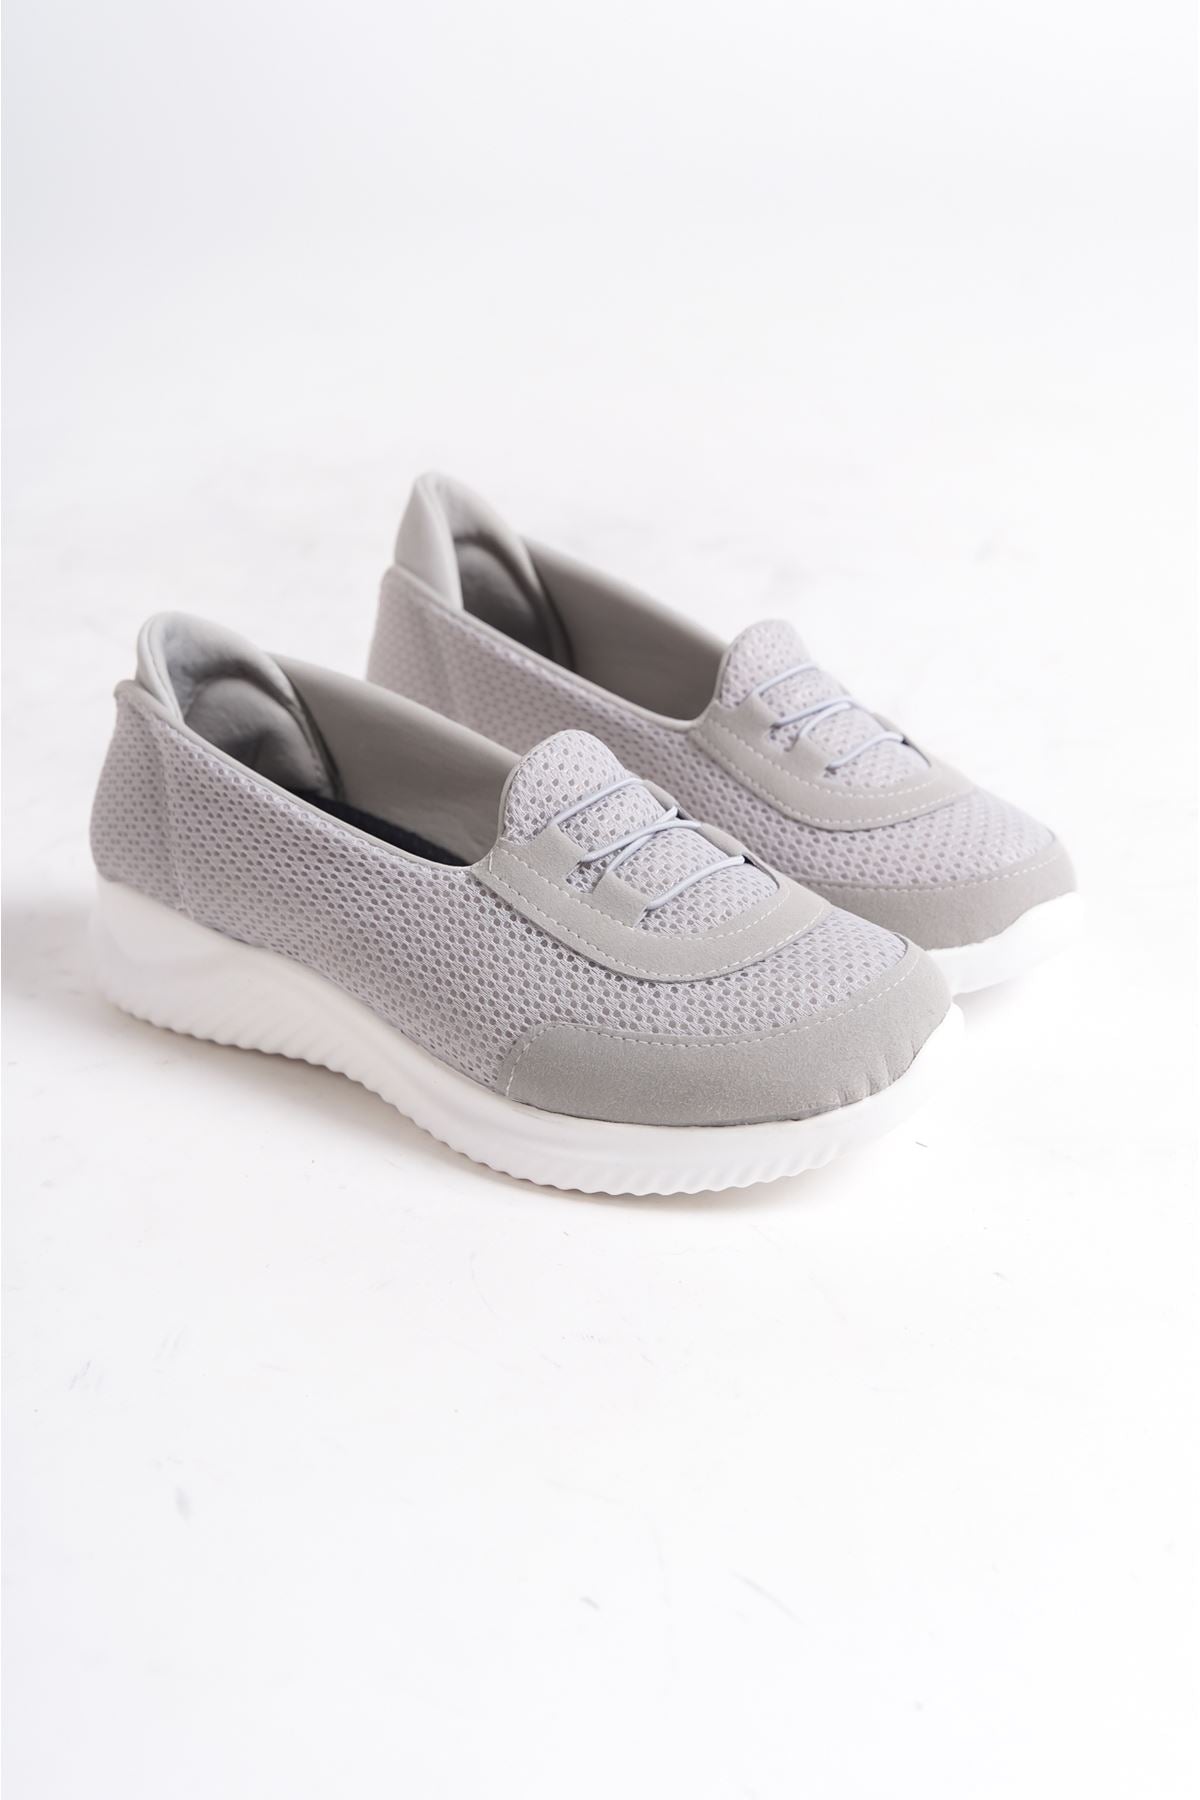 Women's Werva Comfortable Soft Sole Laceless Sports Shoes - STREETMODE ™